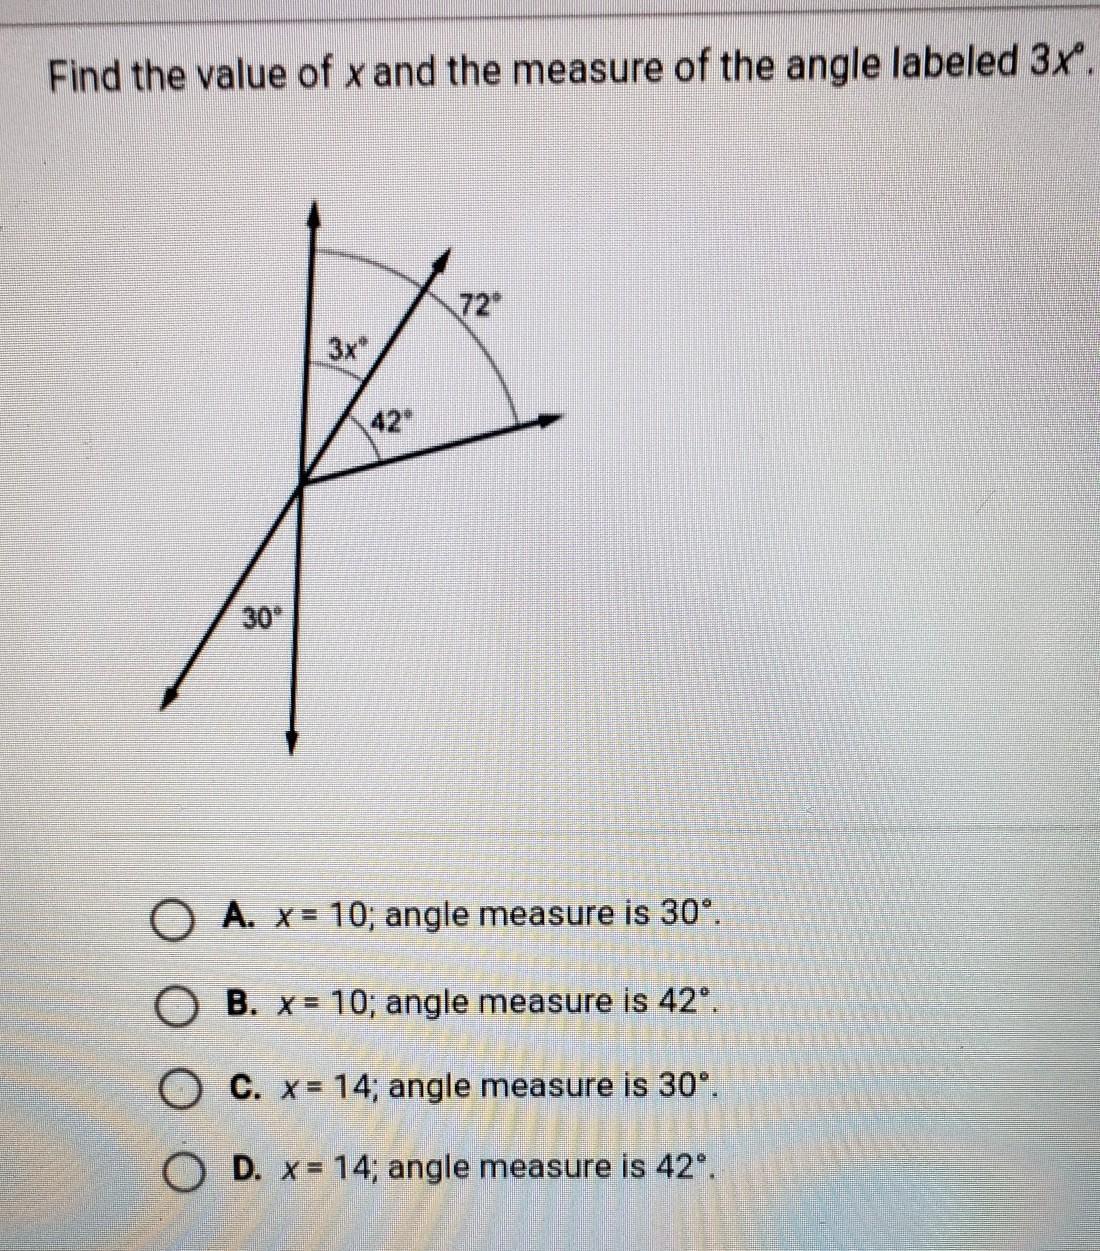 Stuck On This Problem, Can't Find 3x